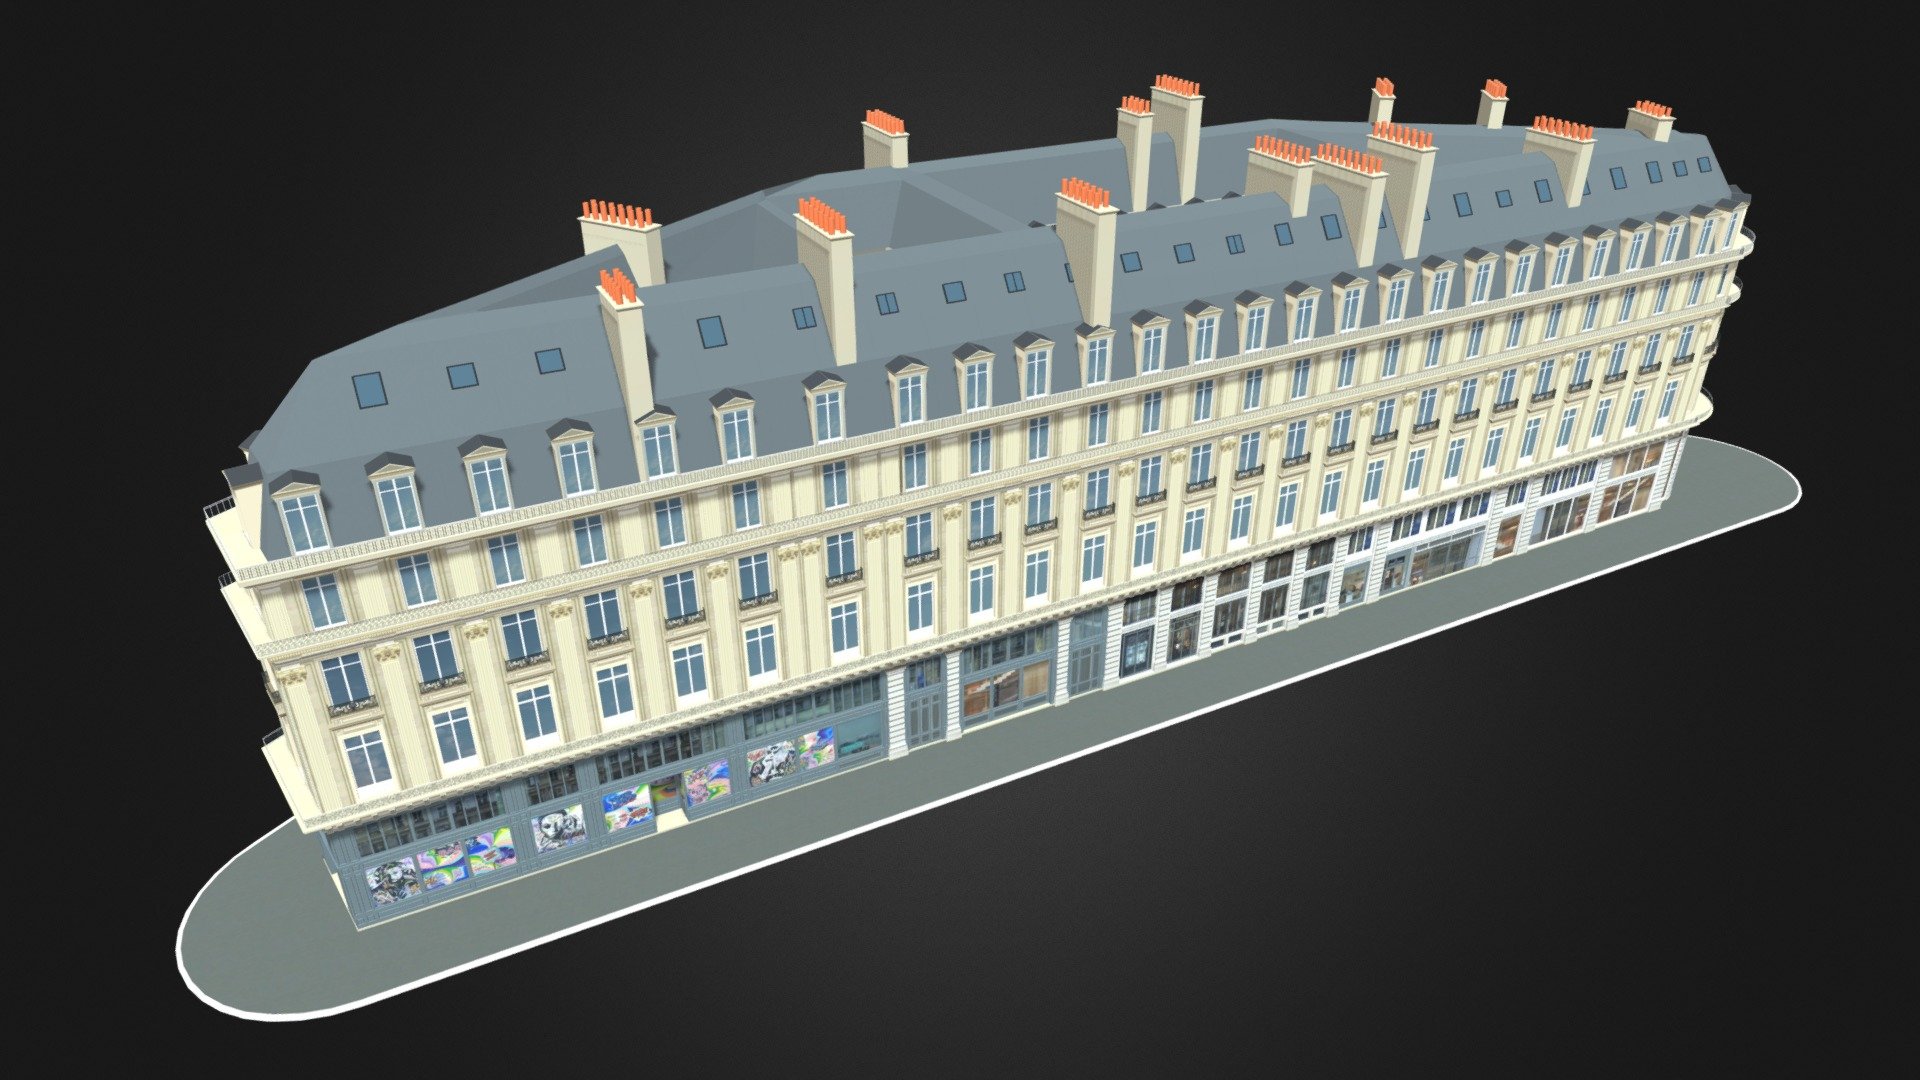 Paris Apartment Haussmann Building 01
Originally created with 3ds Max 2015 and rendered in V-Ray 3.0.

Total Poly Counts:
Poly Count = 98546
Vertex Count = 141666 - Paris Apartment Haussmann Building 01 - 3D model by nuralam018 3d model